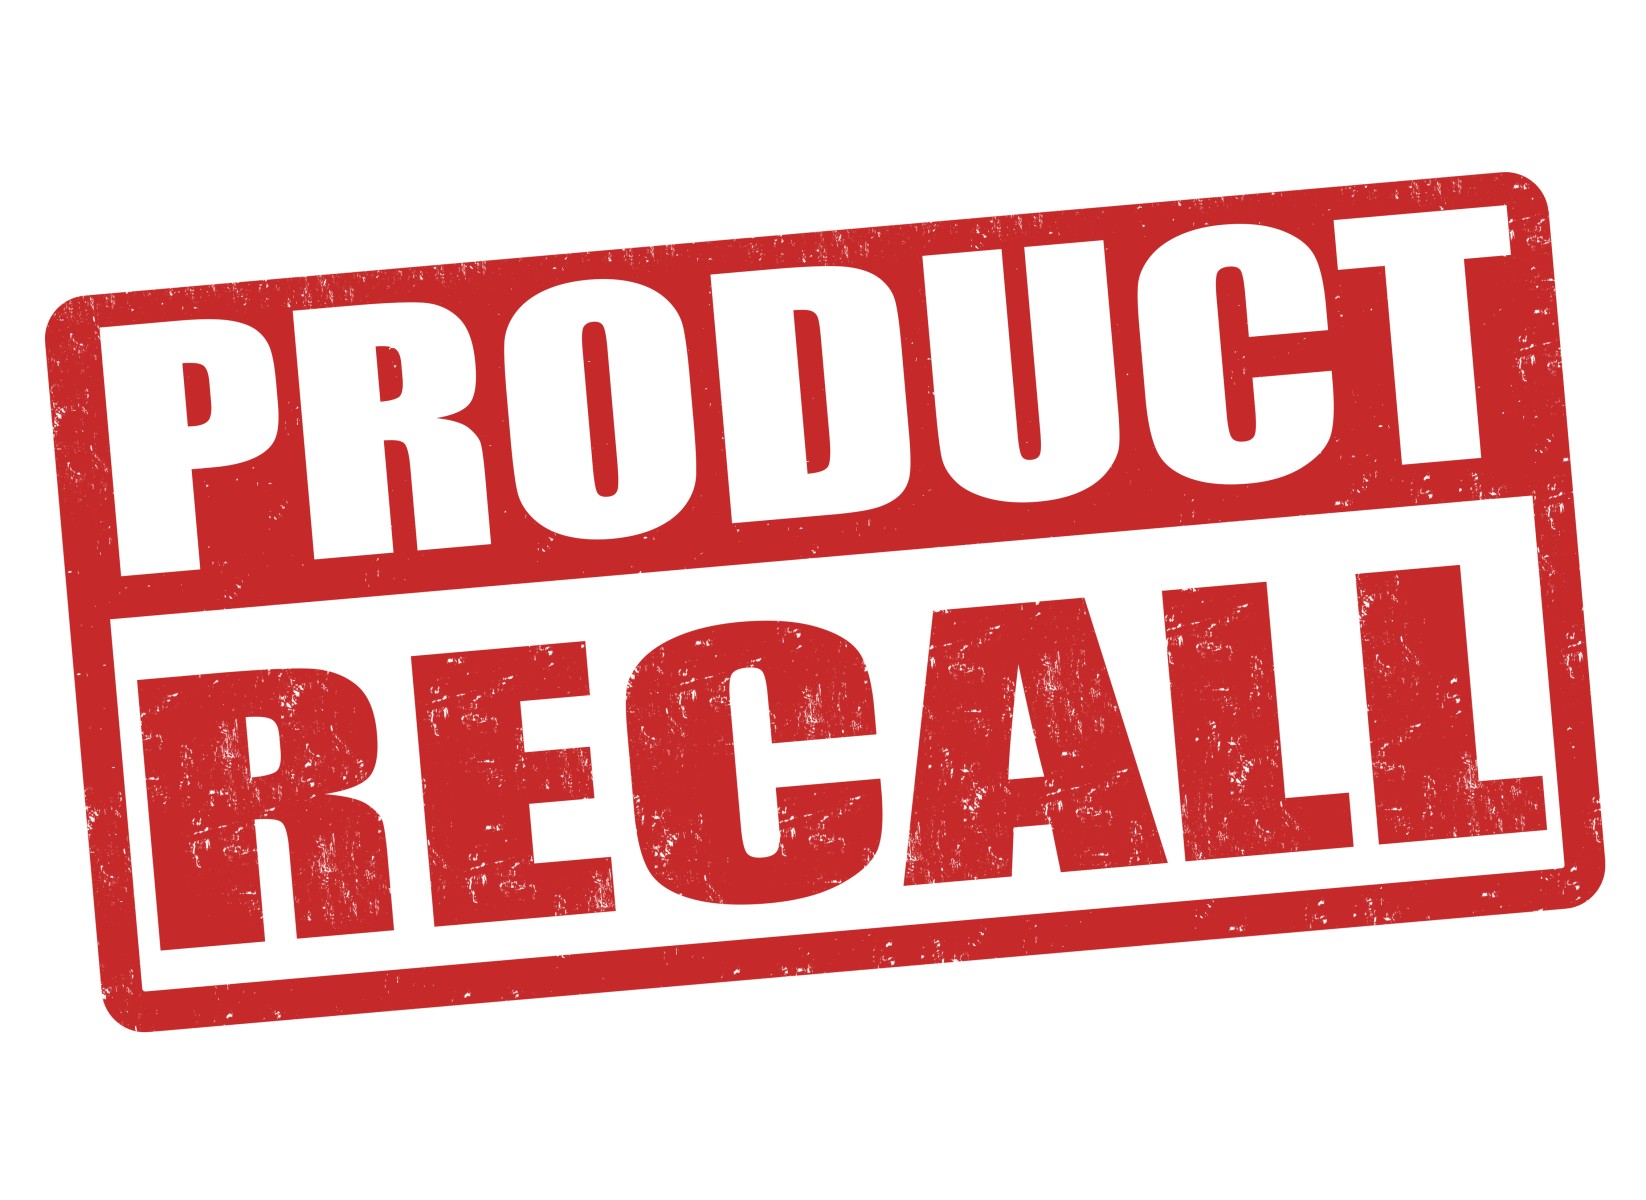 Toy maker recalls 7.5 million Baby Shark children's toys due to a risk of  impalement